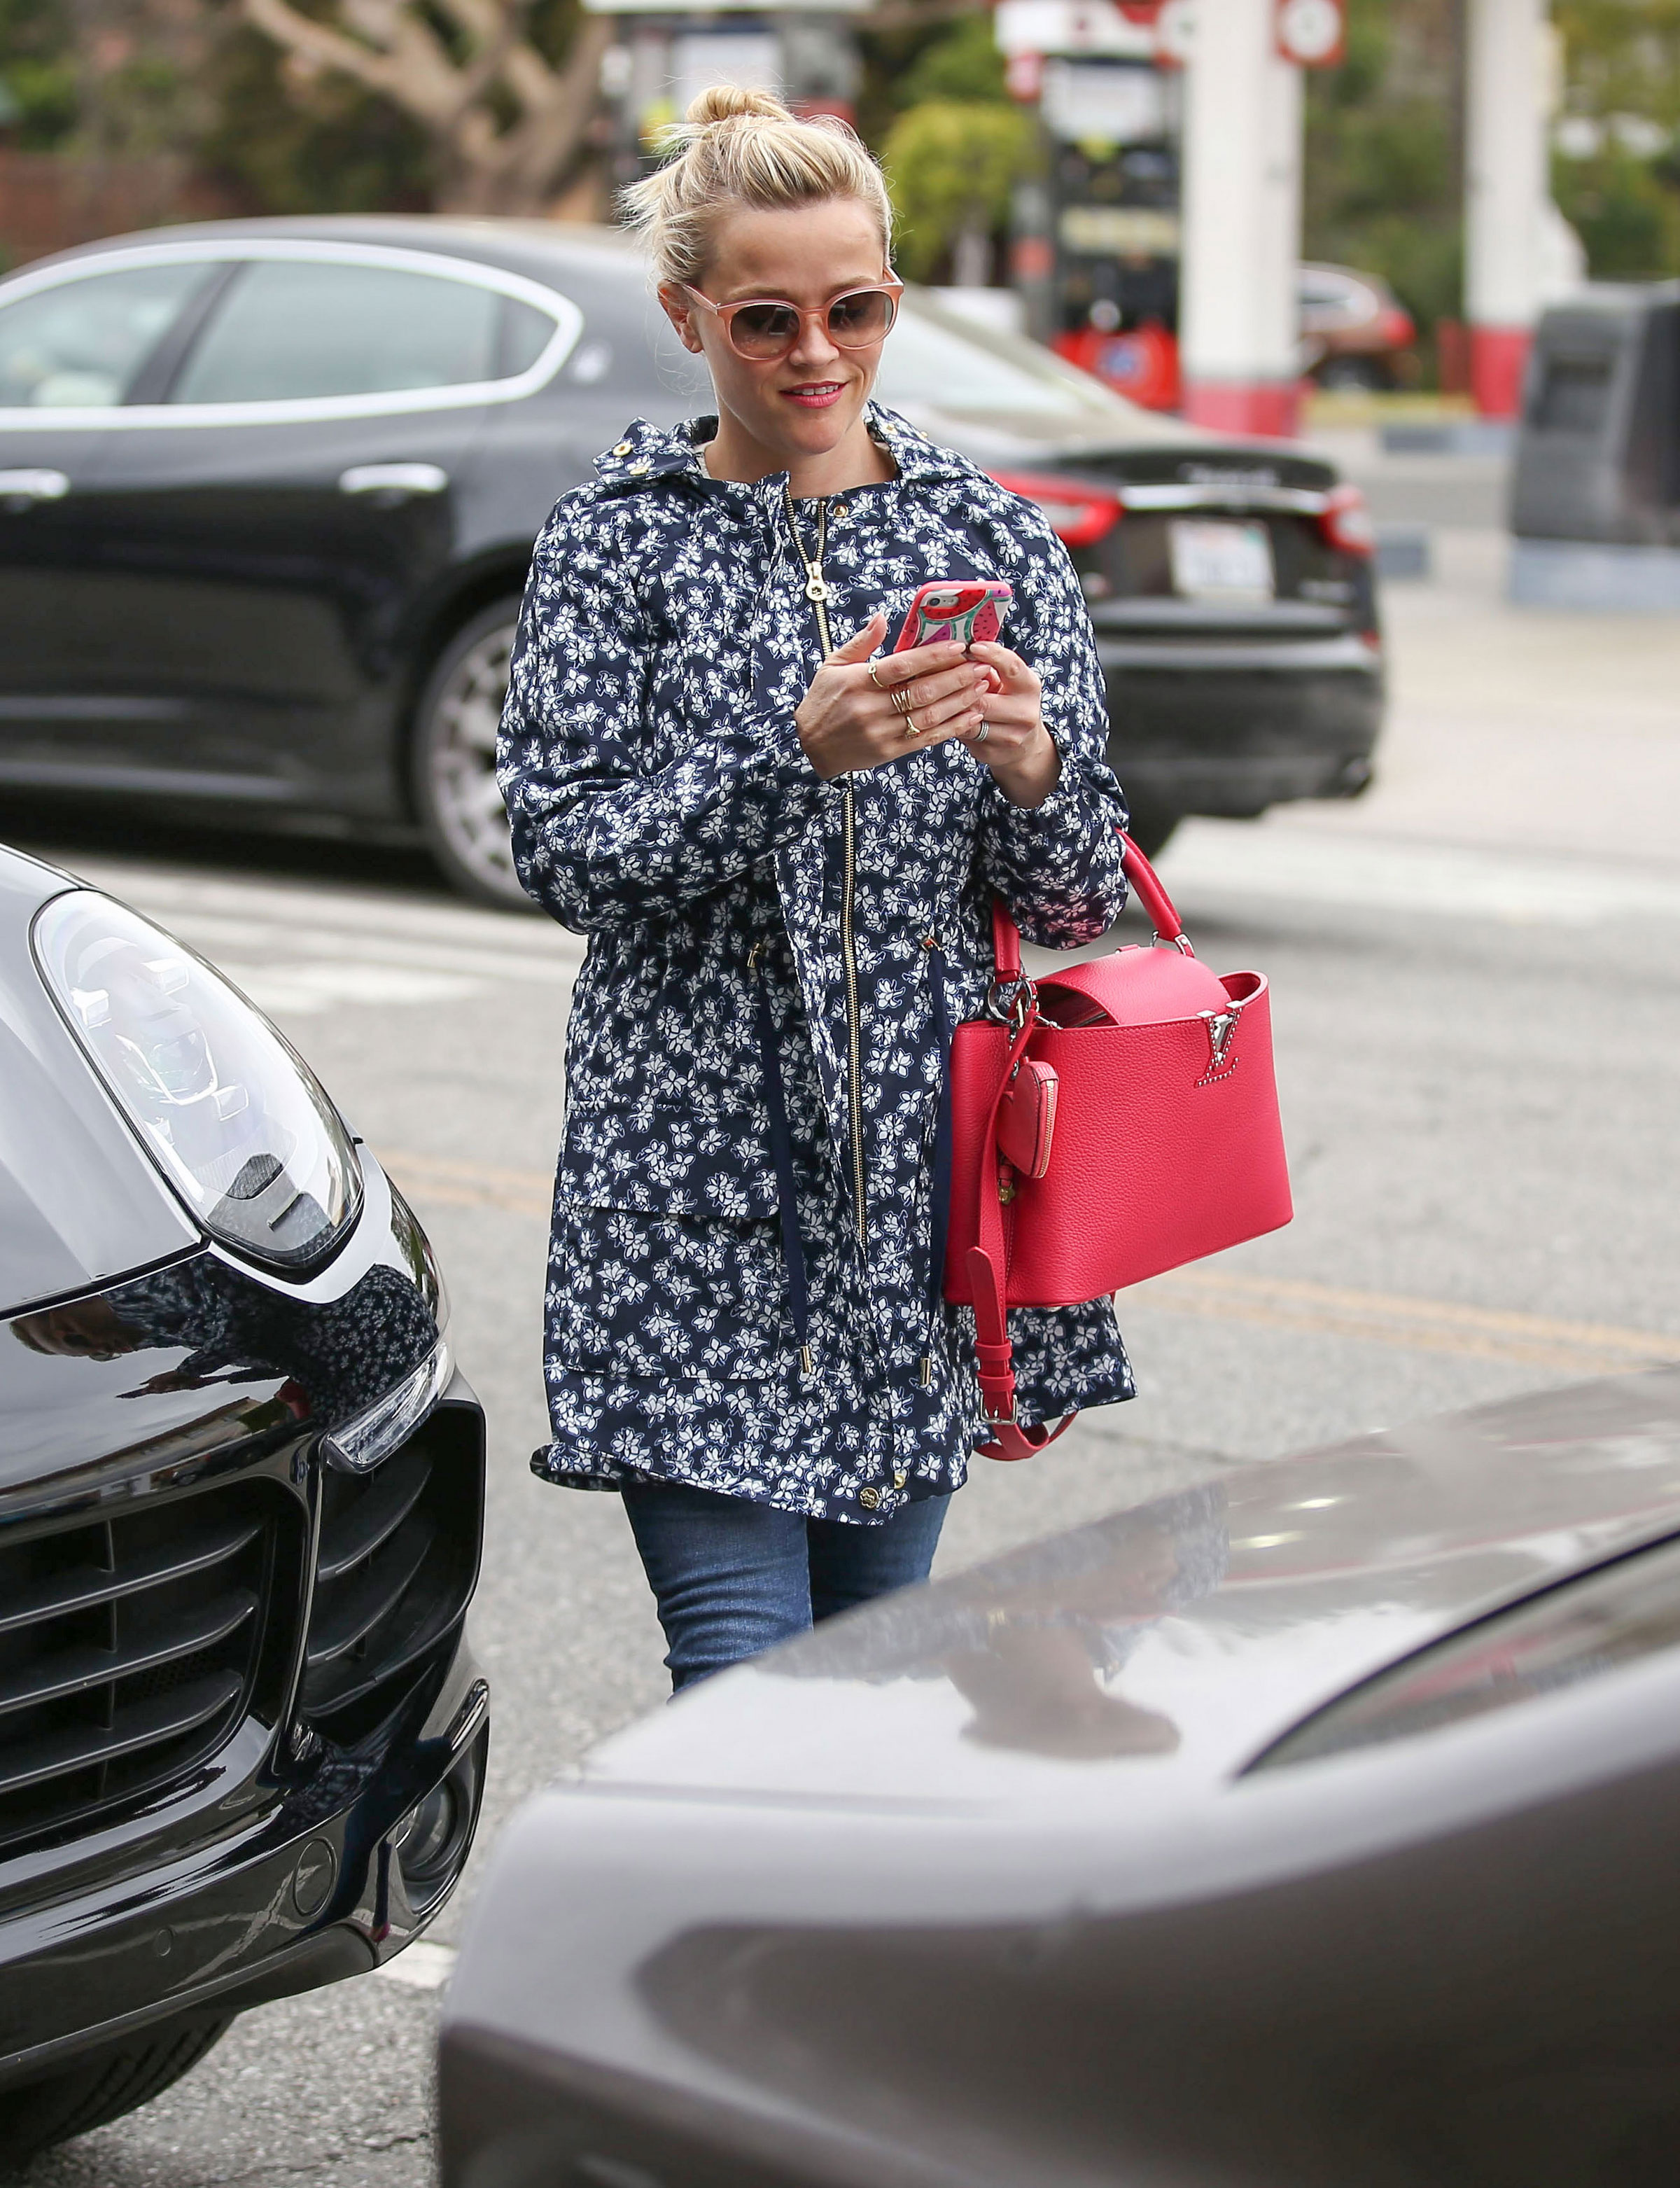 Reese Witherspoon stays stylish in the rain in a floral Draper James jacket.